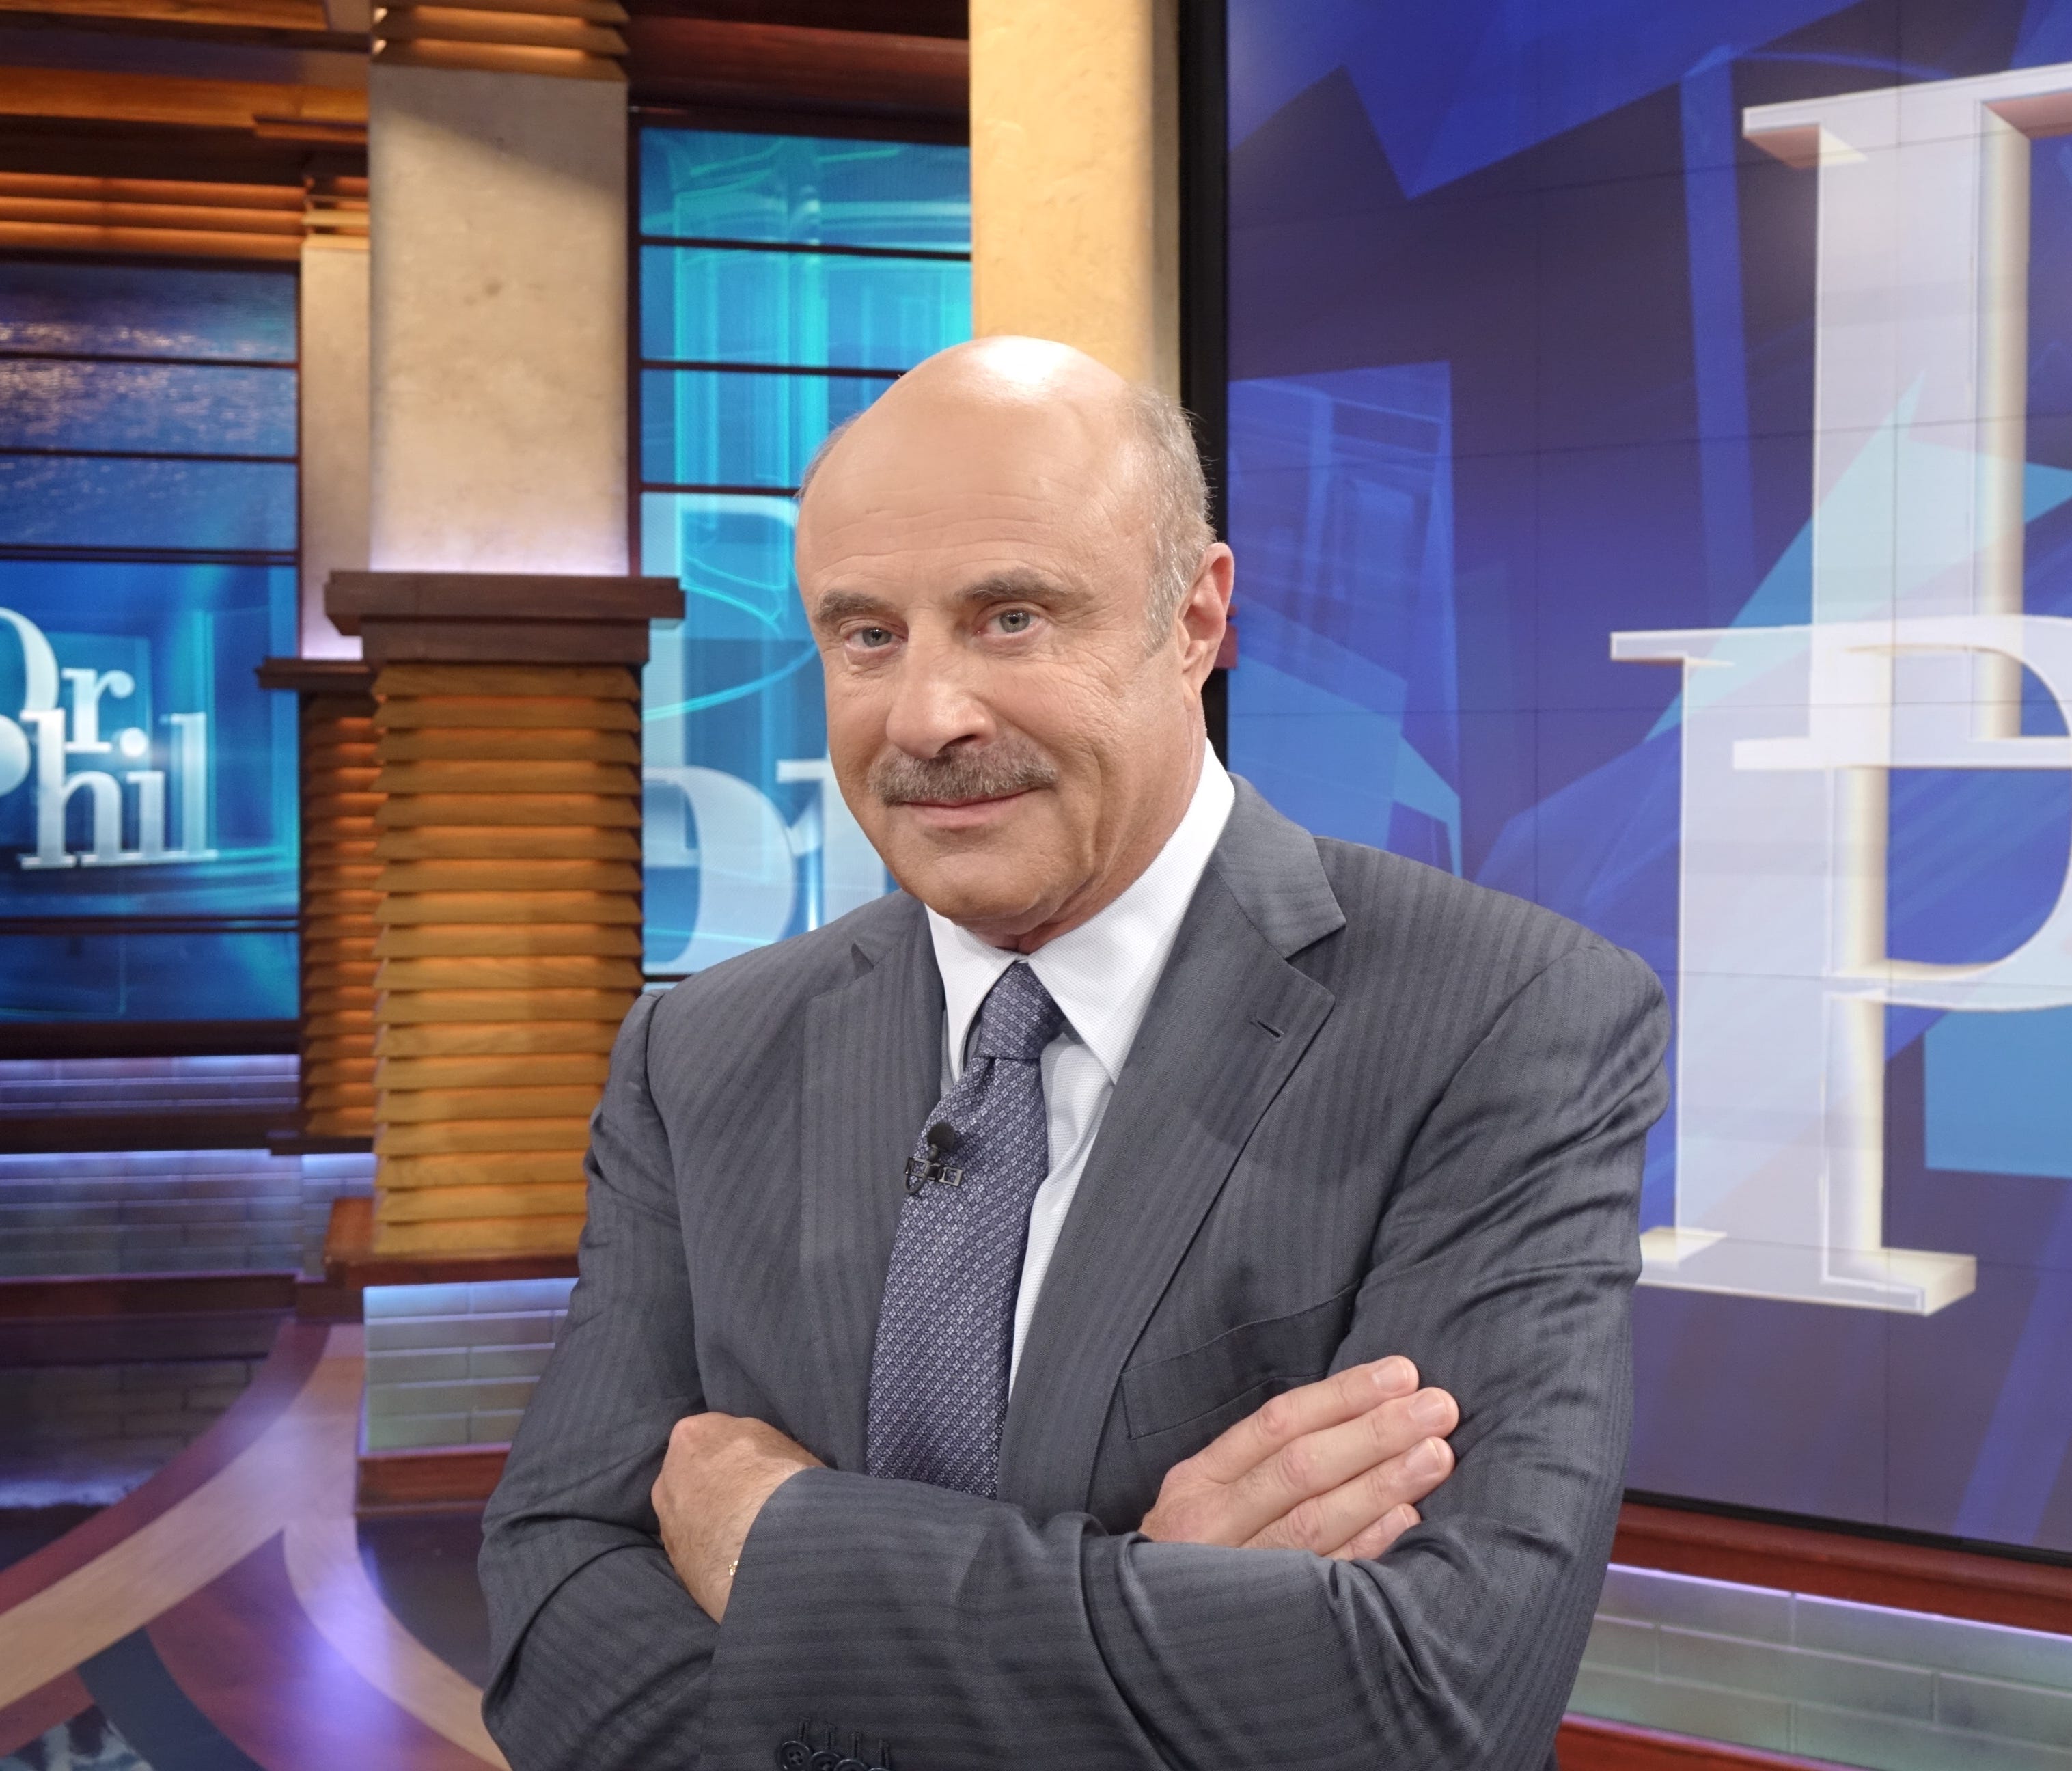 TV's 'Dr. Phil,' Phil McGraw, on the set of his syndicated TV talk show.